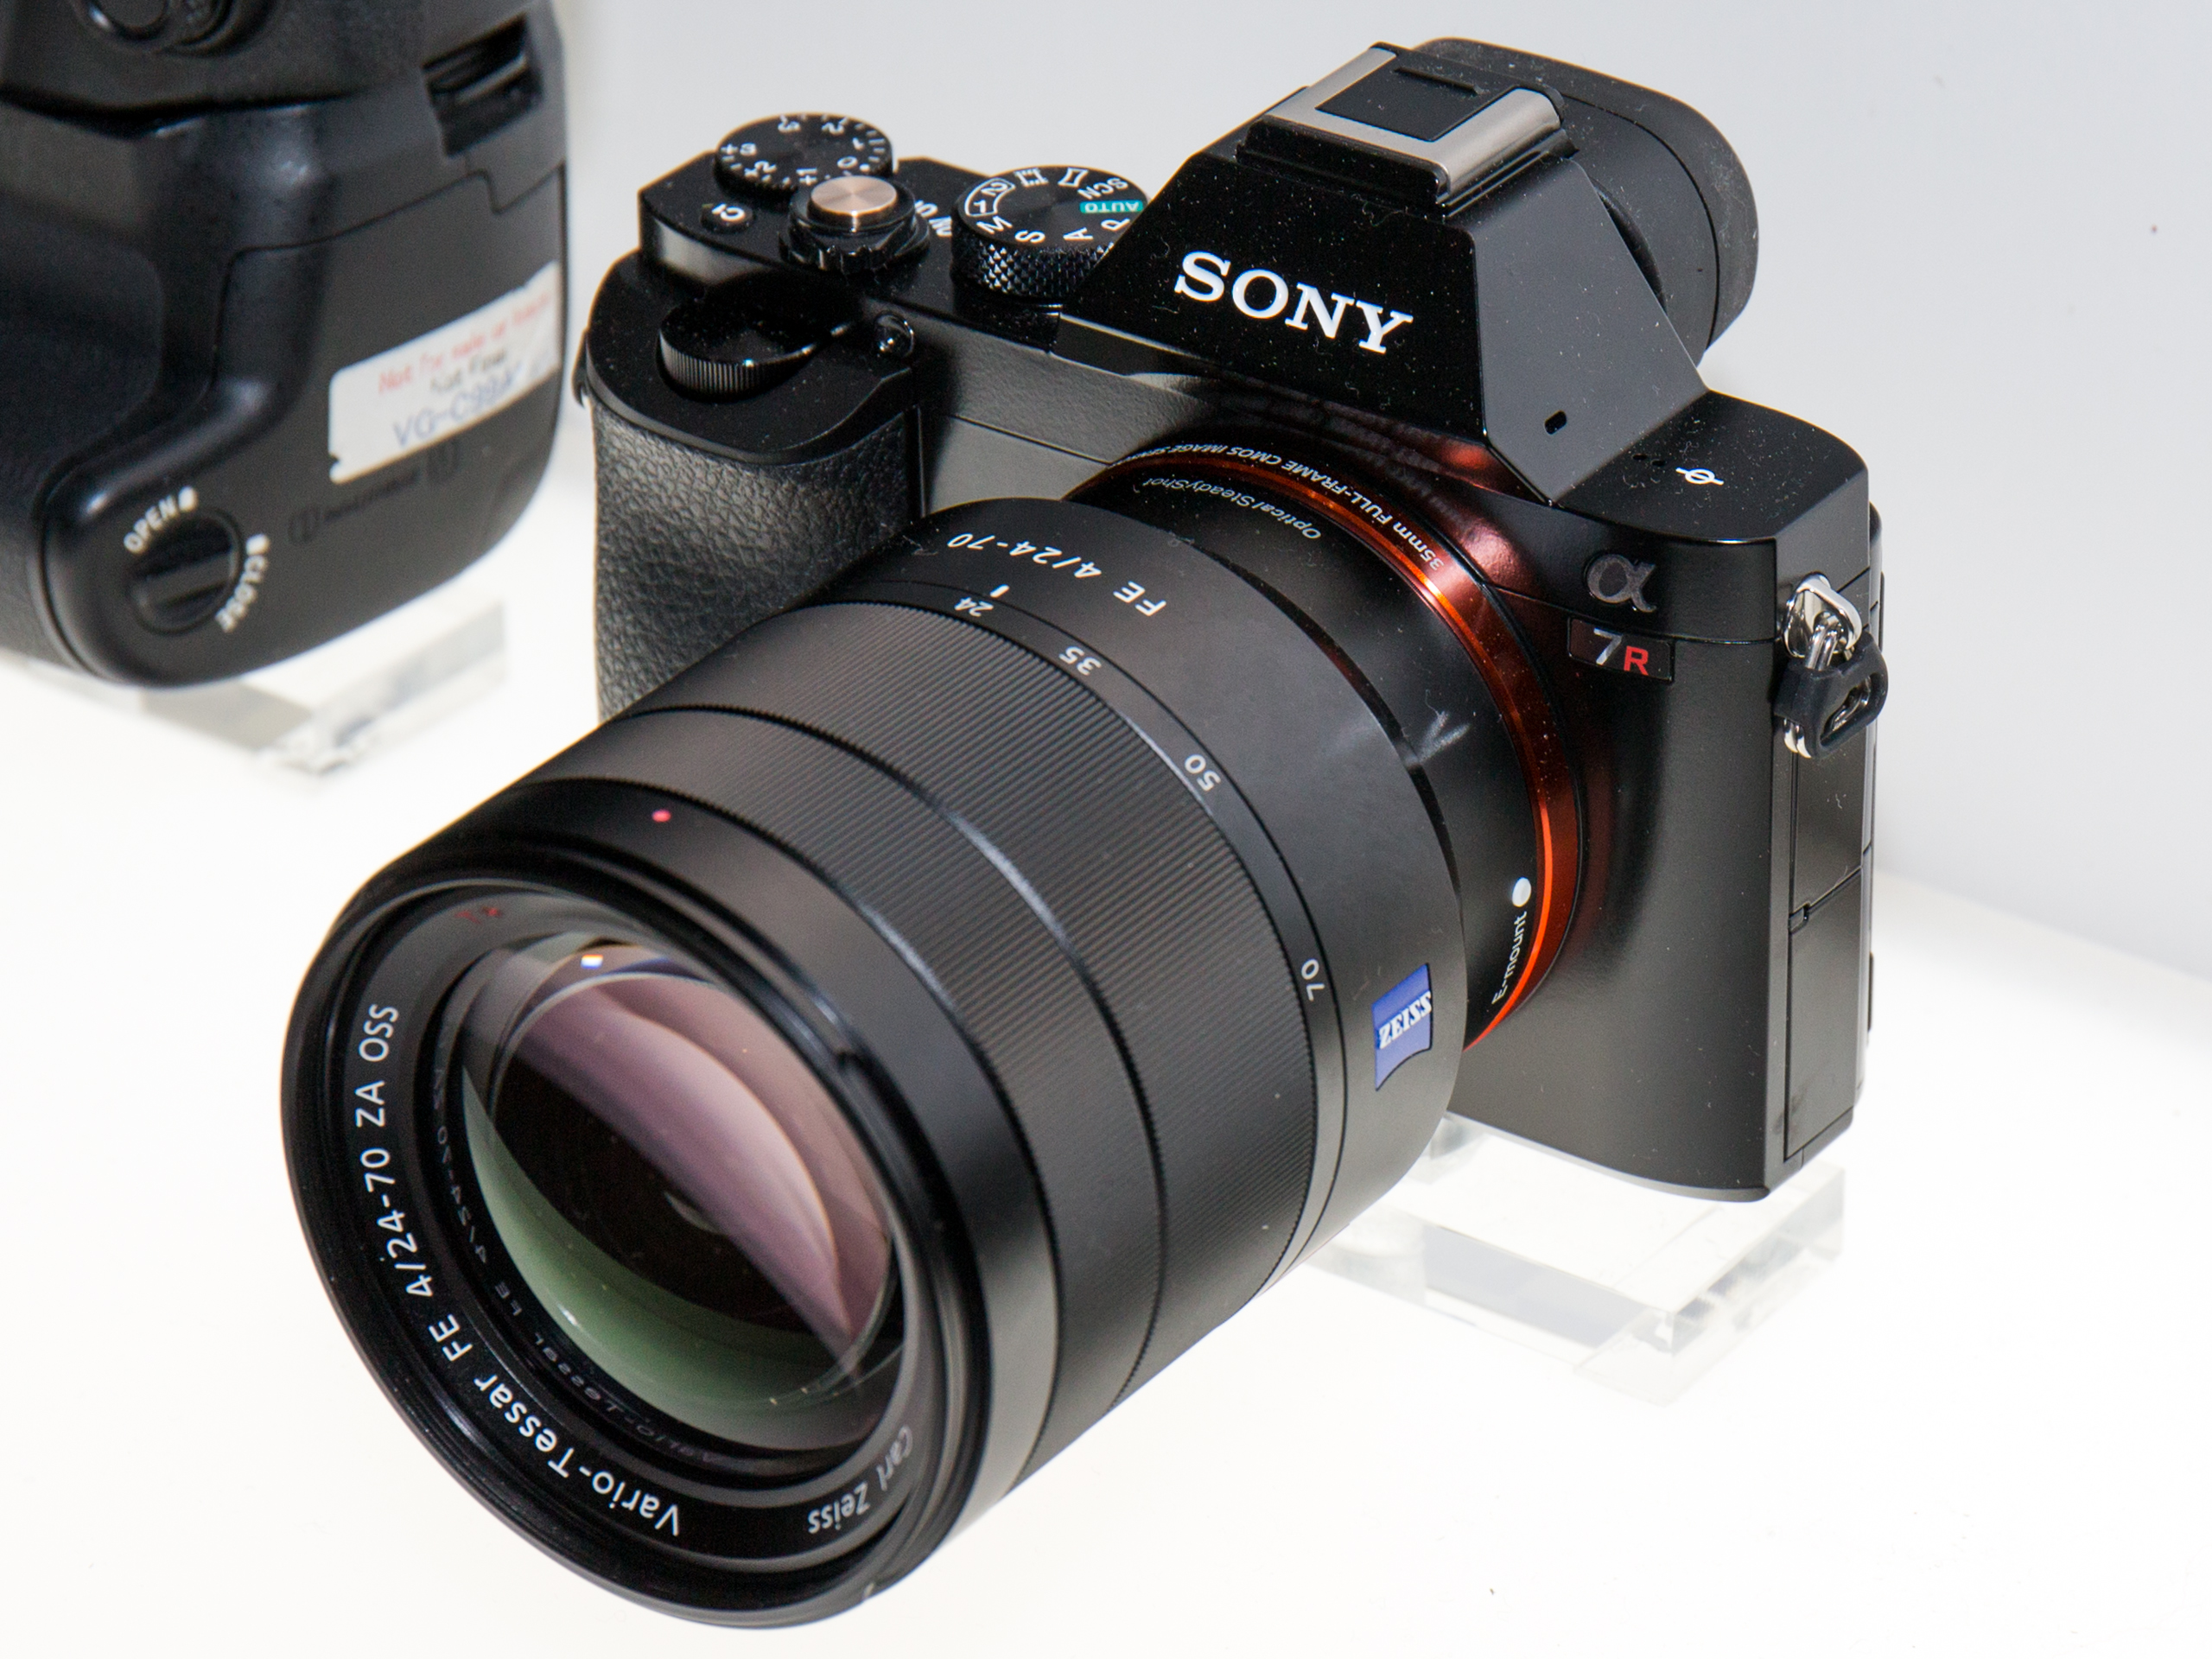 File:Sony Alpha ILCE-7R front 2014 CP+.jpg